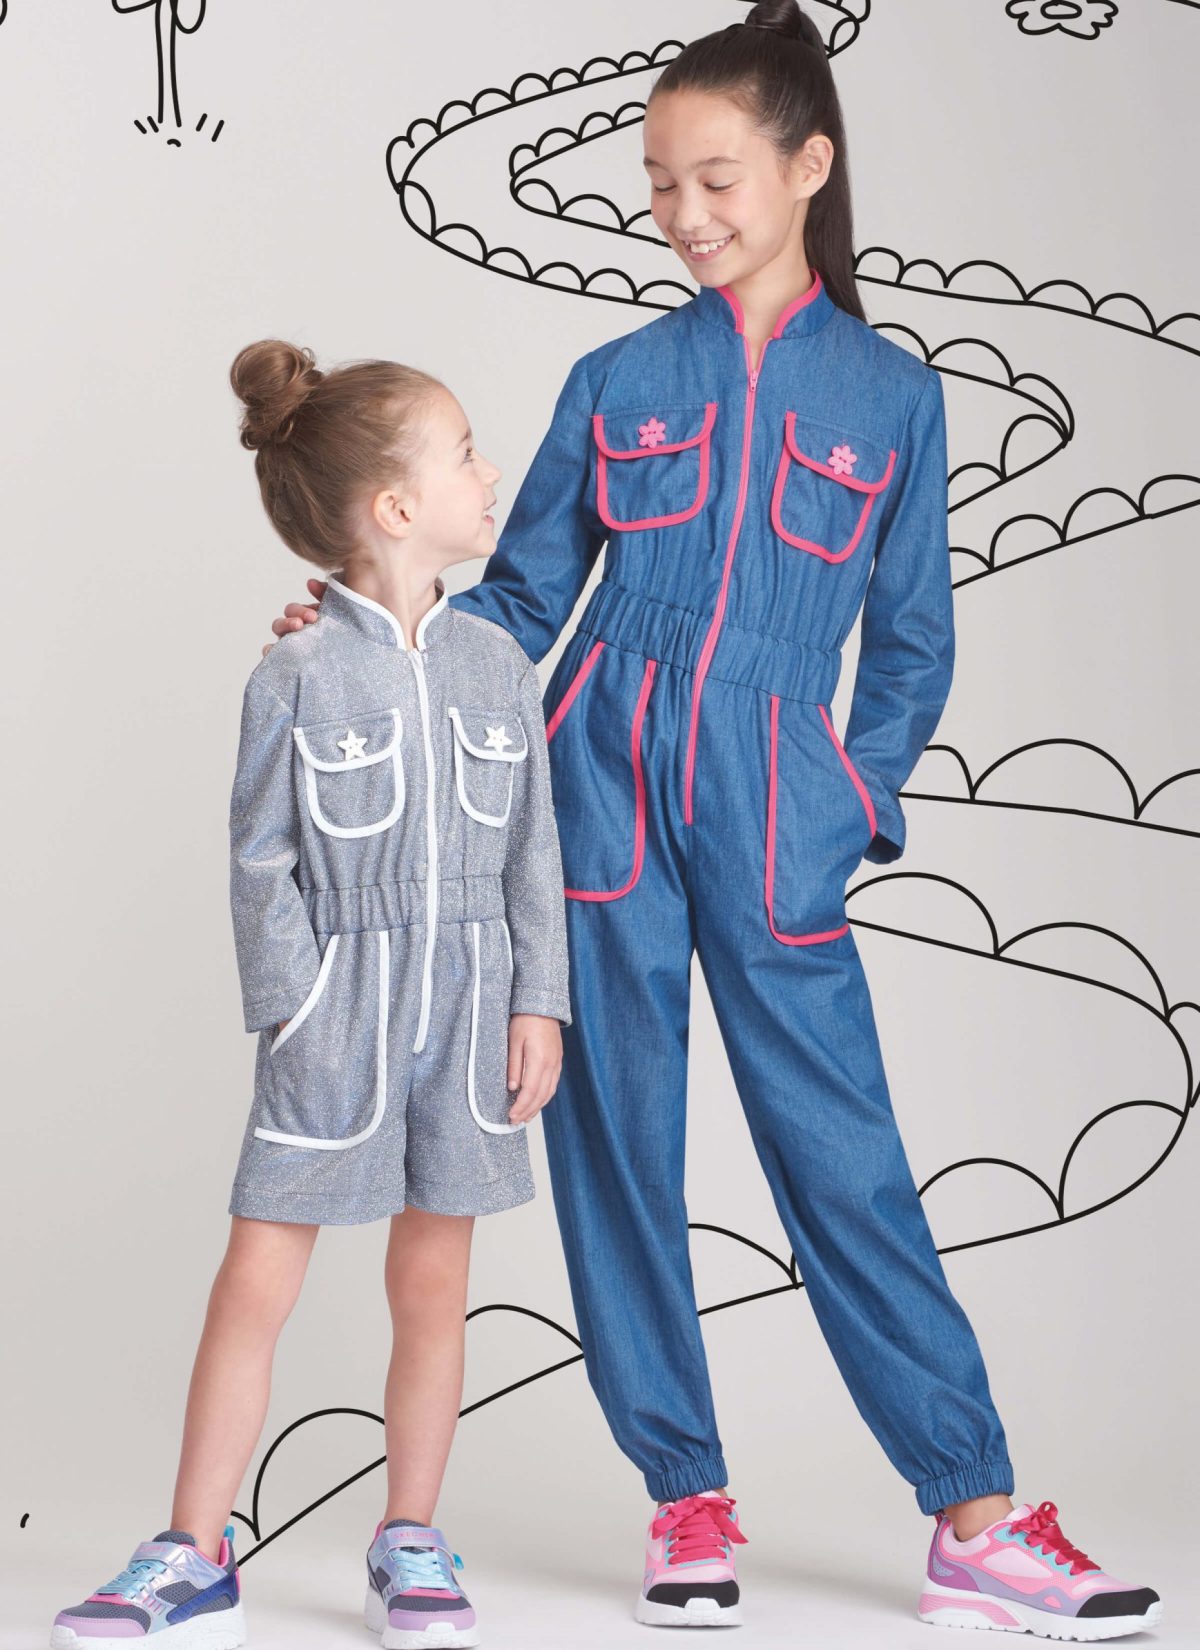 Simplicity Sewing Pattern S9722 Children's and Girls' Jumpsuit, Romper and Dress